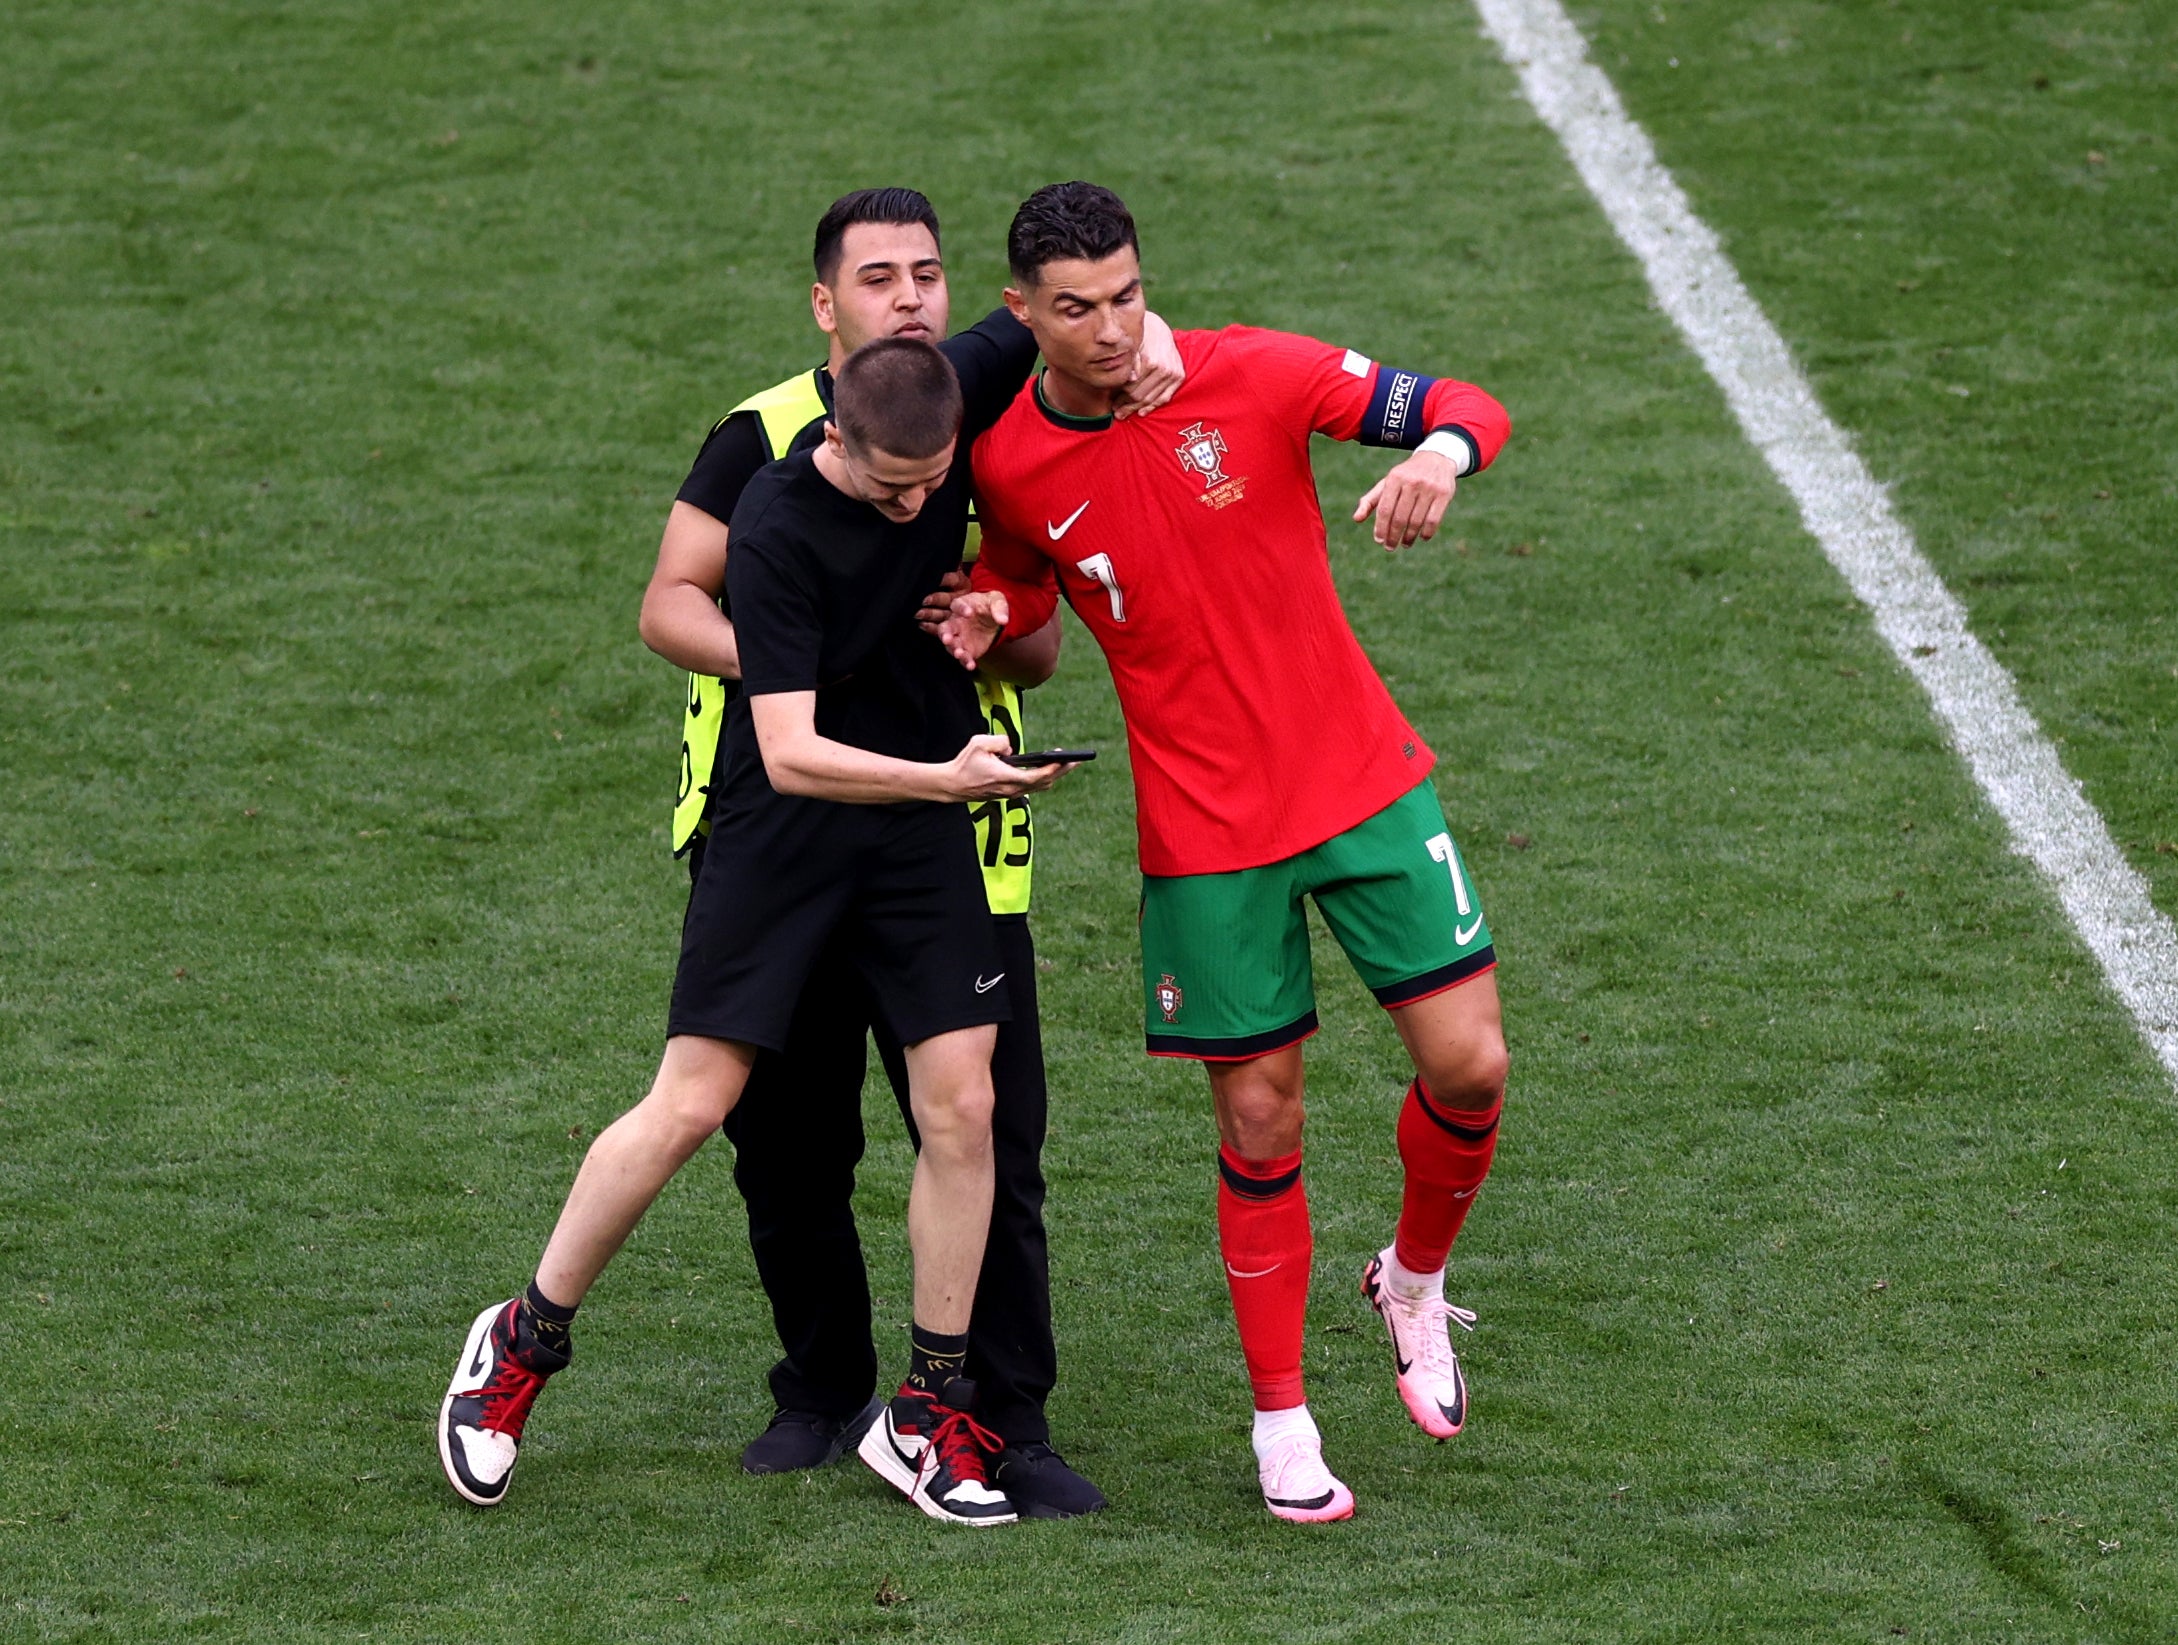 One fan grabs Ronaldo by the neck as he tries to take a selfie with the star forward